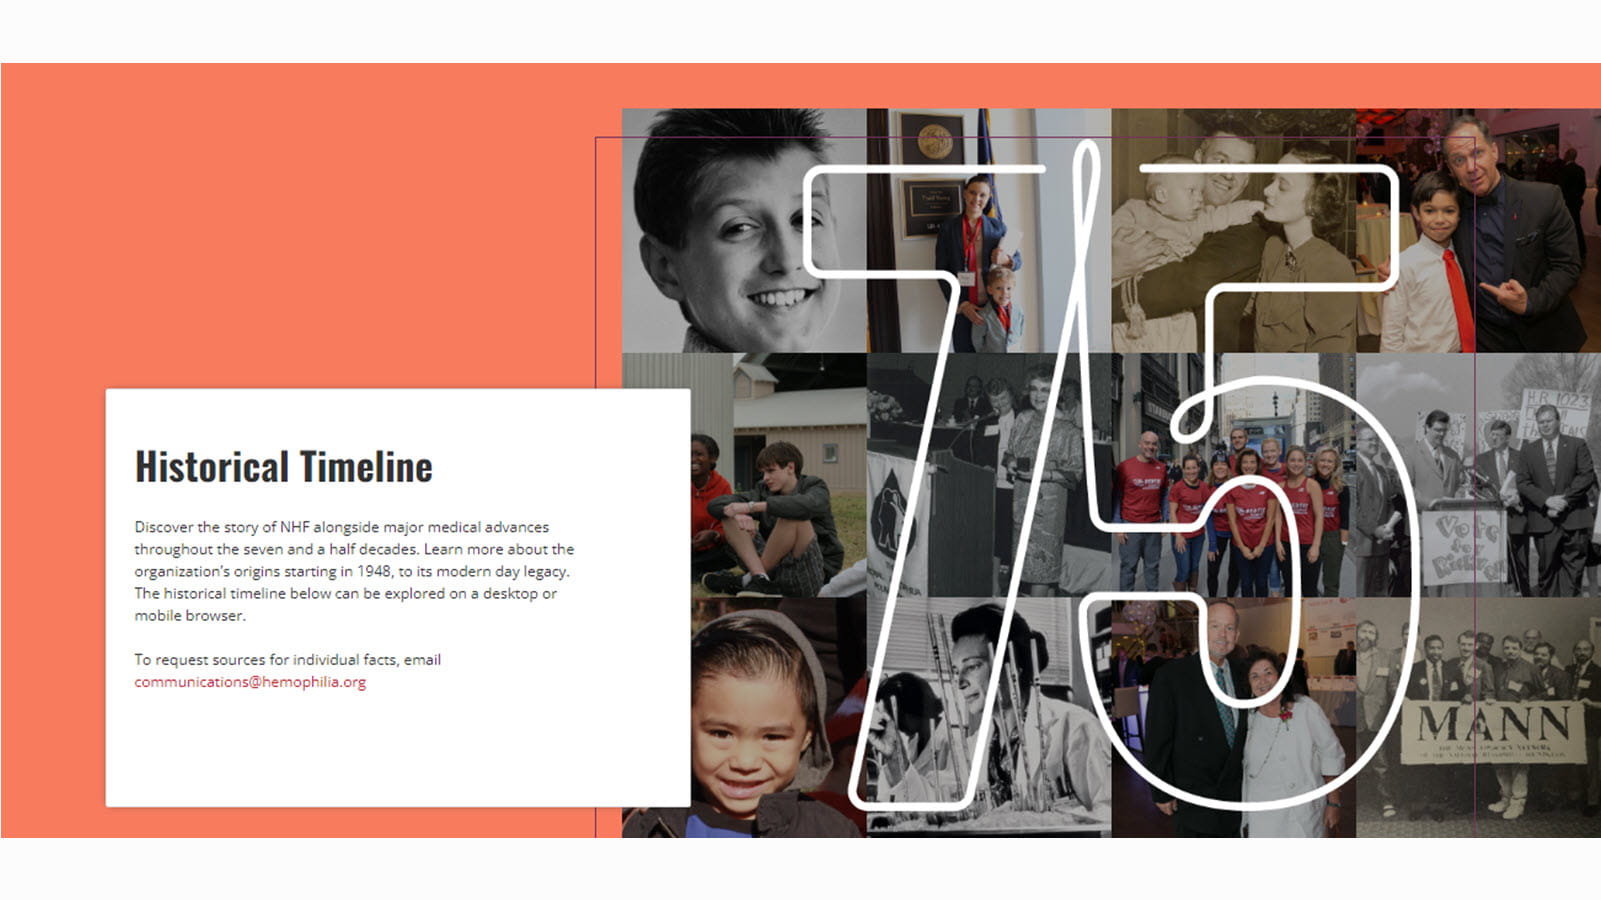 The National Hemophilia Foundtion's 75th anniversary timeline